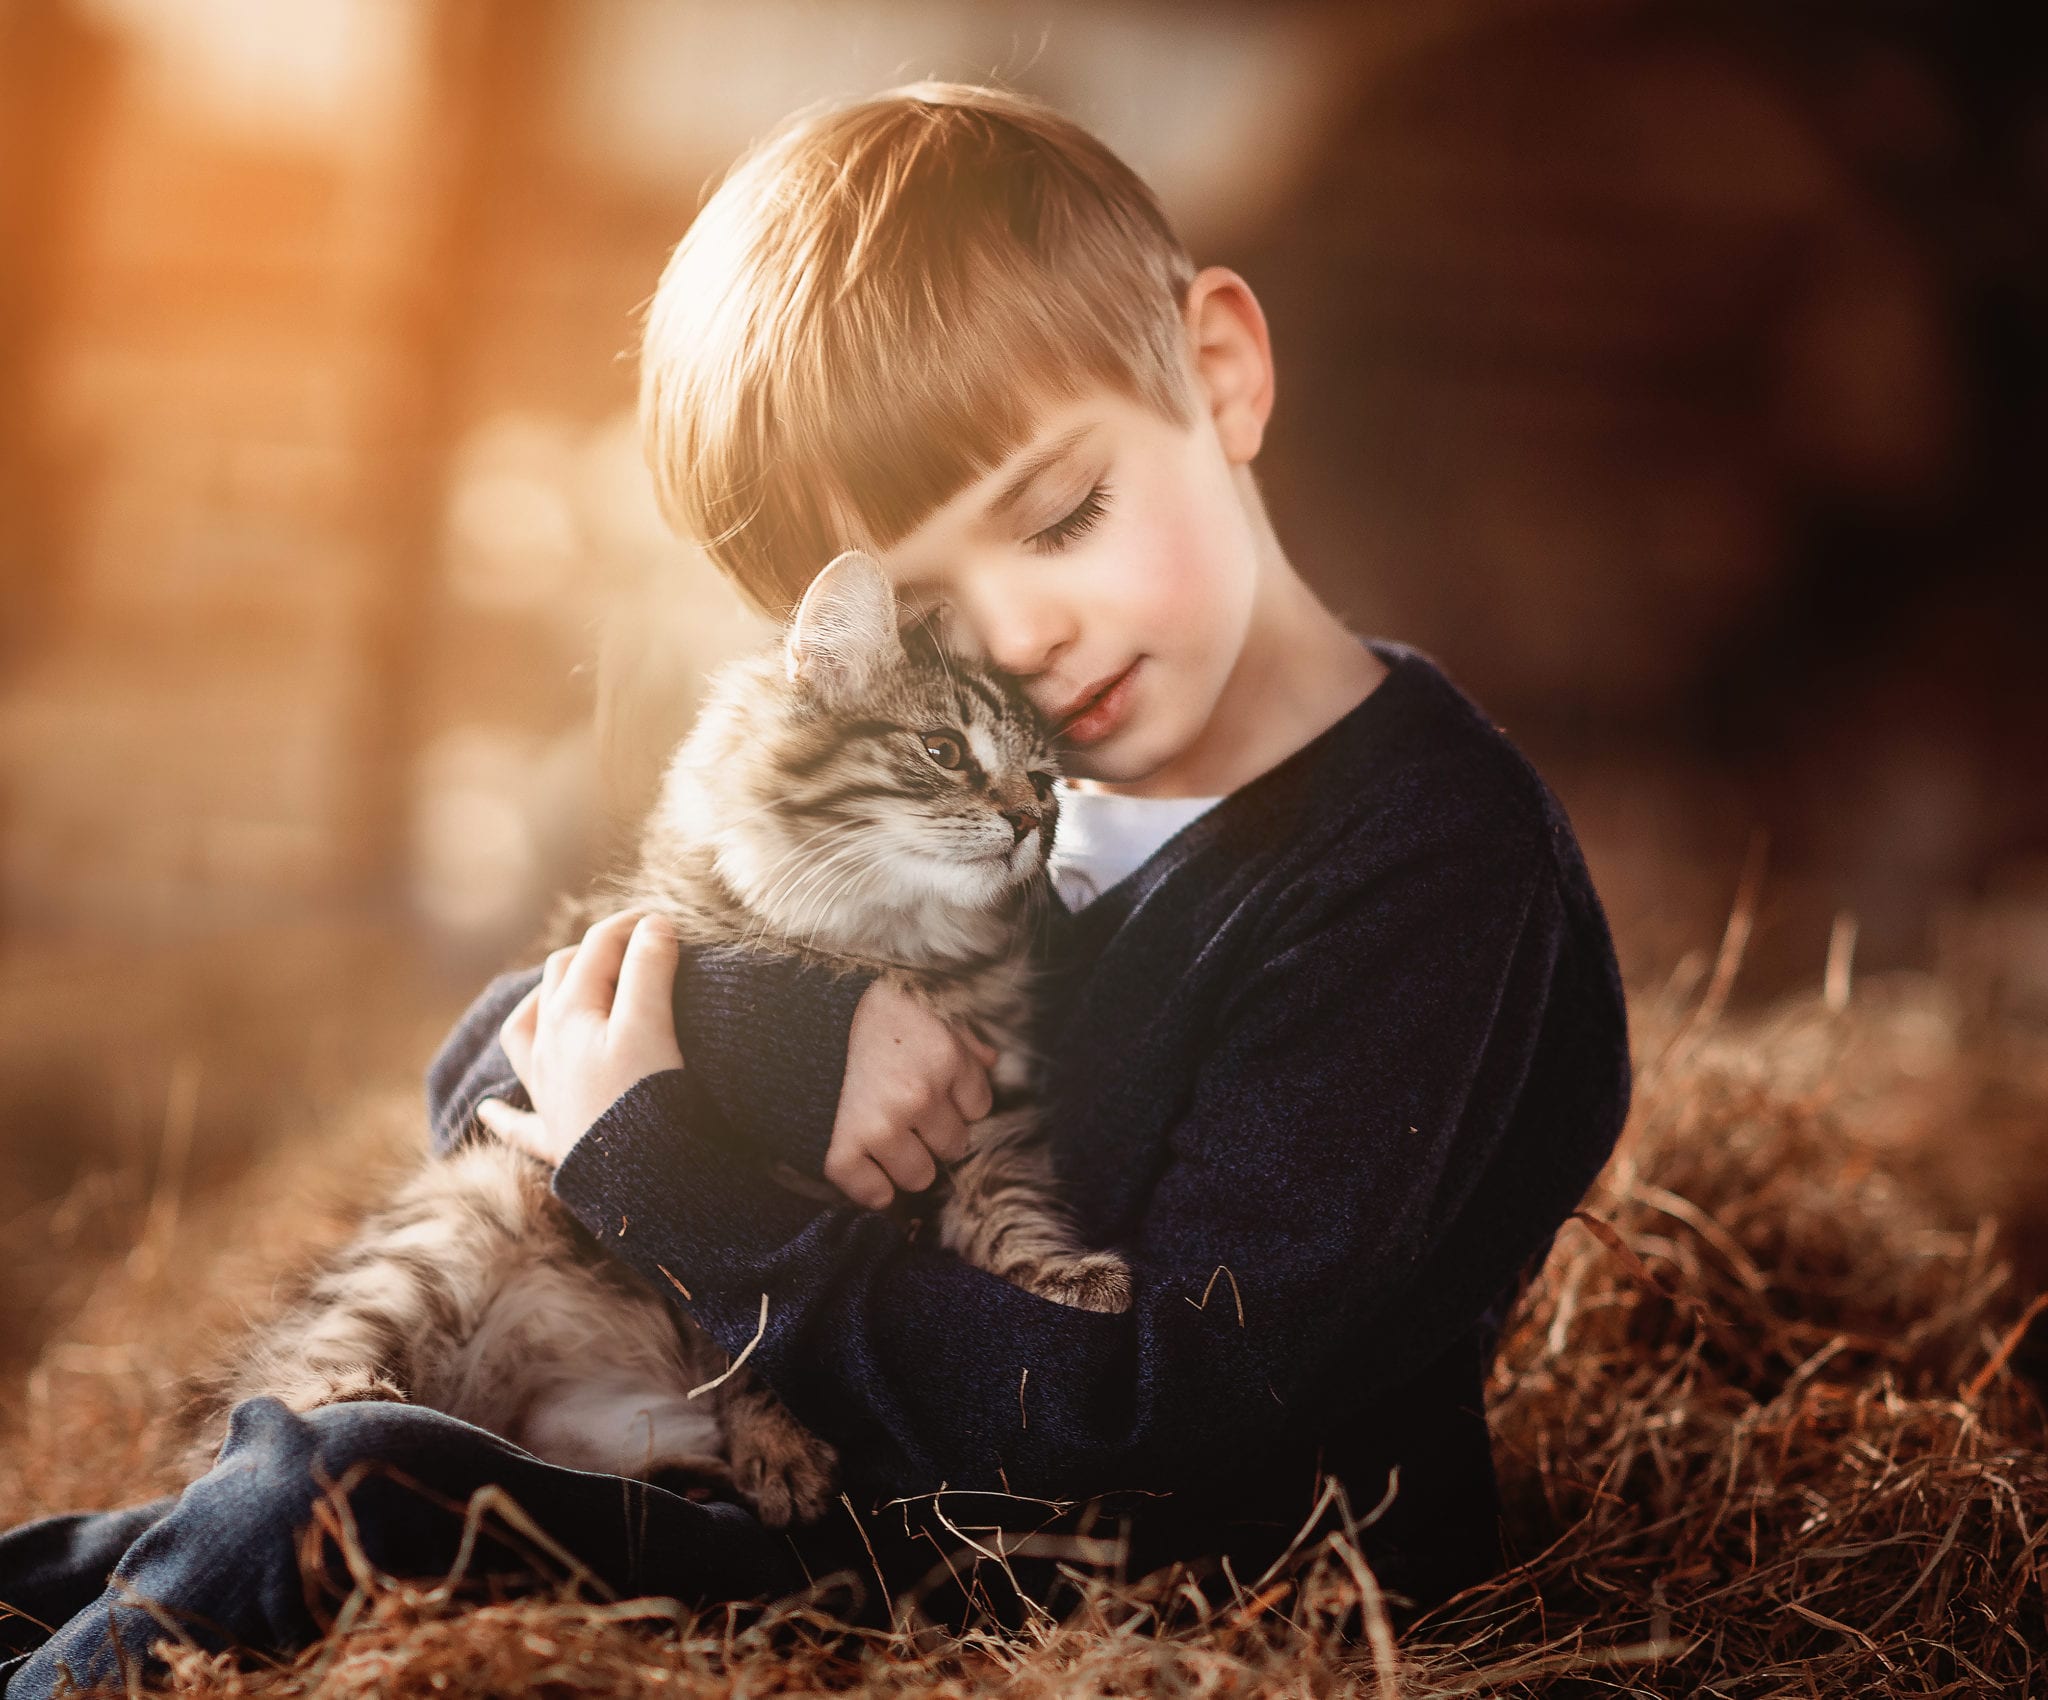 How to edit kids and animals in Photoshop